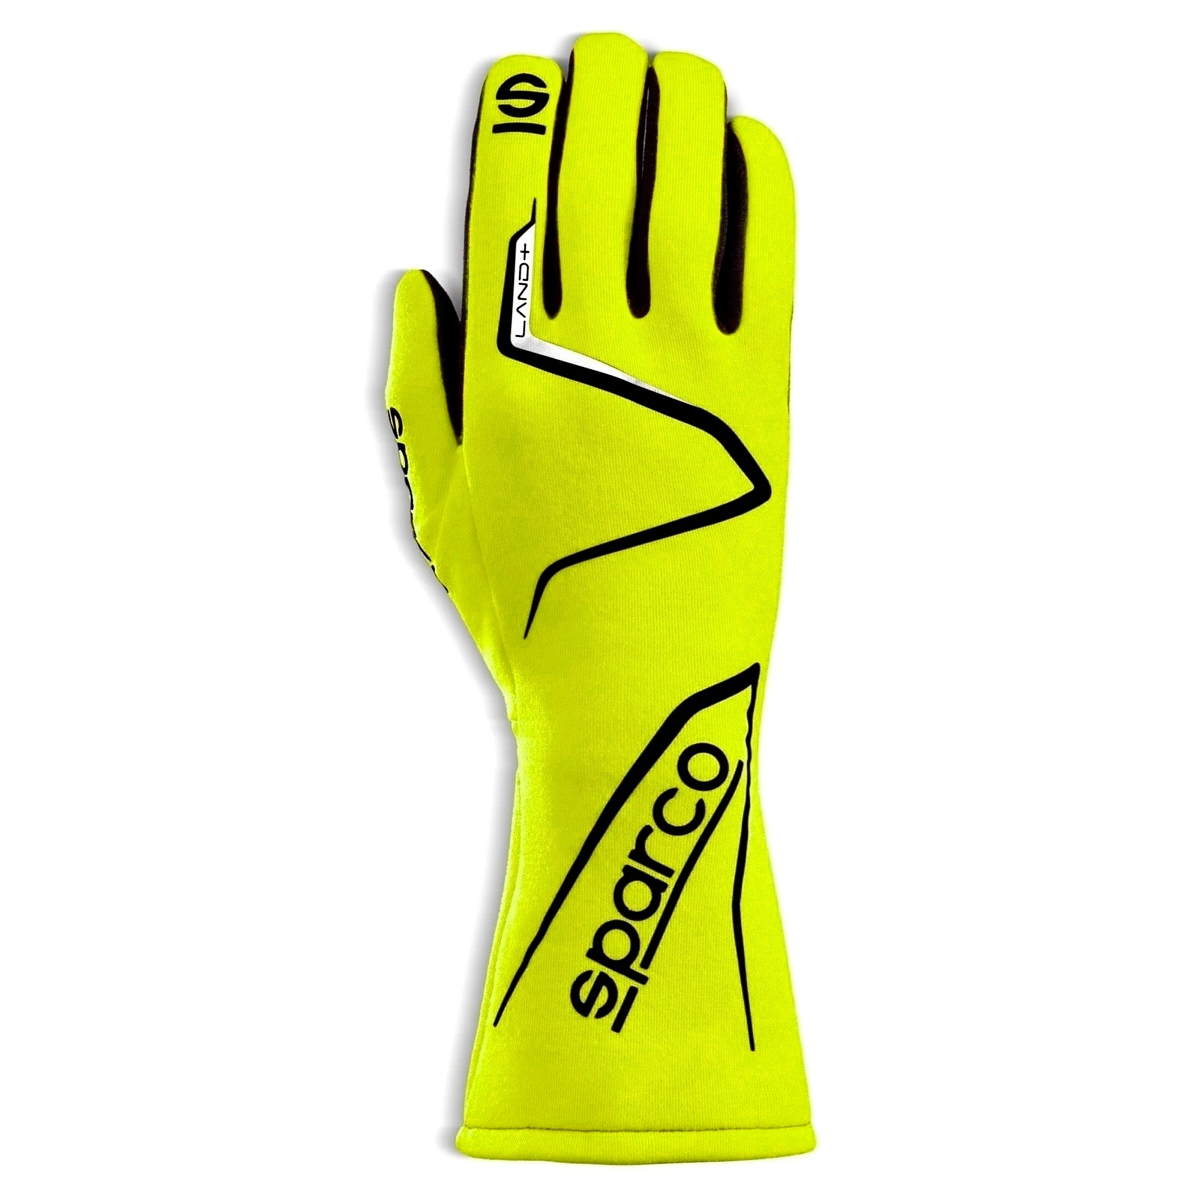 Sparco 00136313GF Driving Gloves, Land, SFI 3.3/5, FIA Approved, Single Layer, Fire Retardant Fabric, Yellow, 2X-Large, Pair